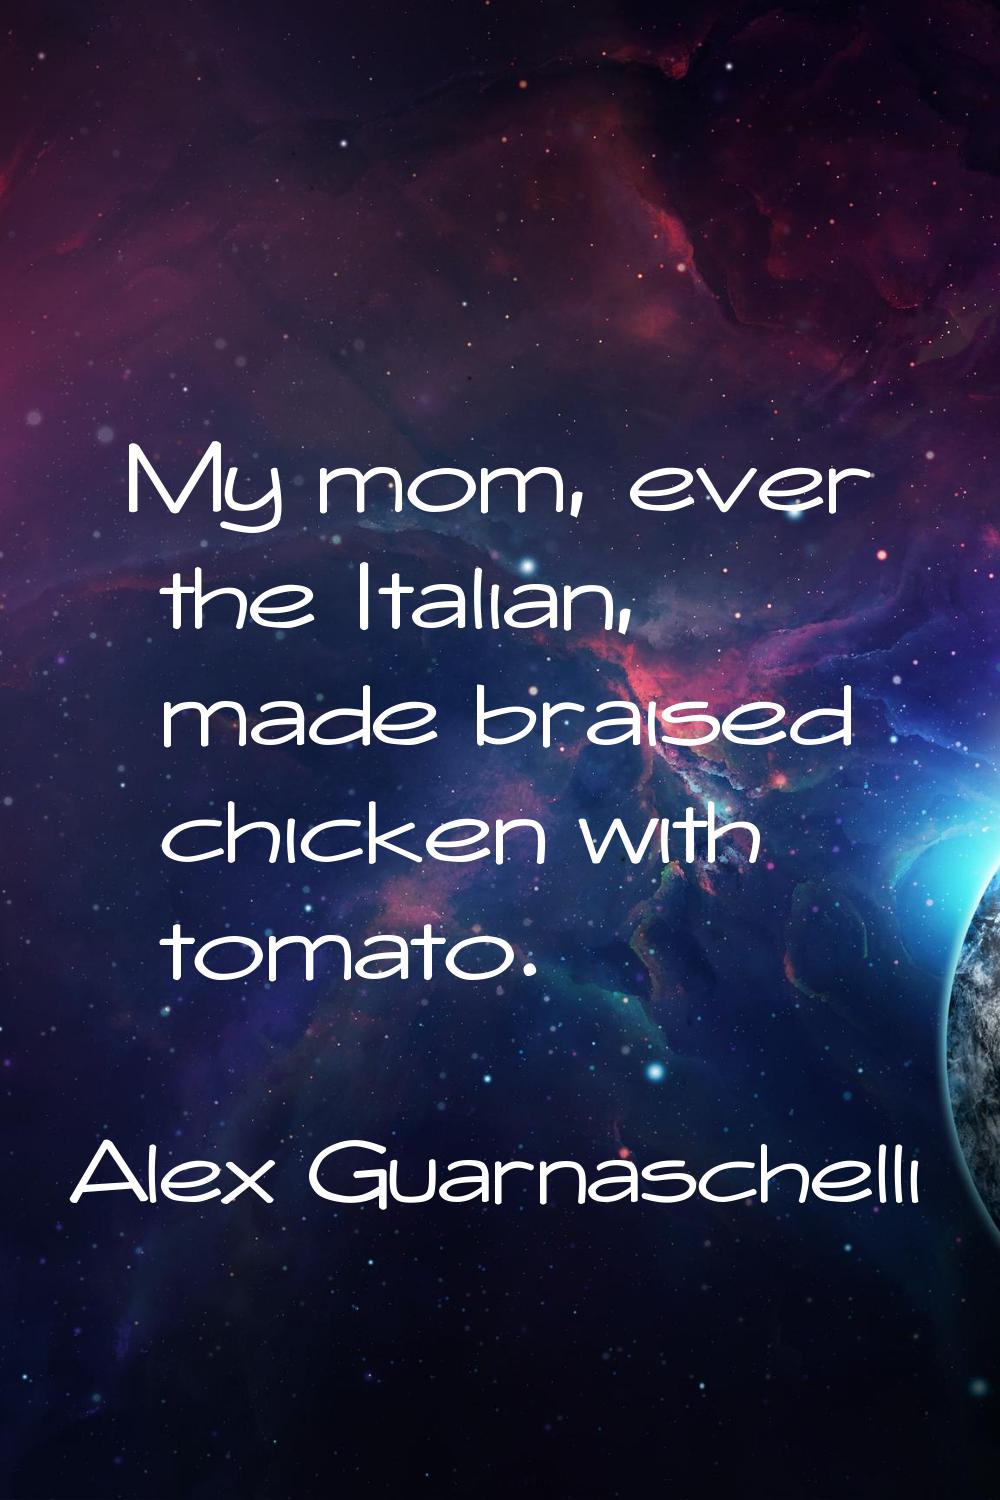 My mom, ever the Italian, made braised chicken with tomato.